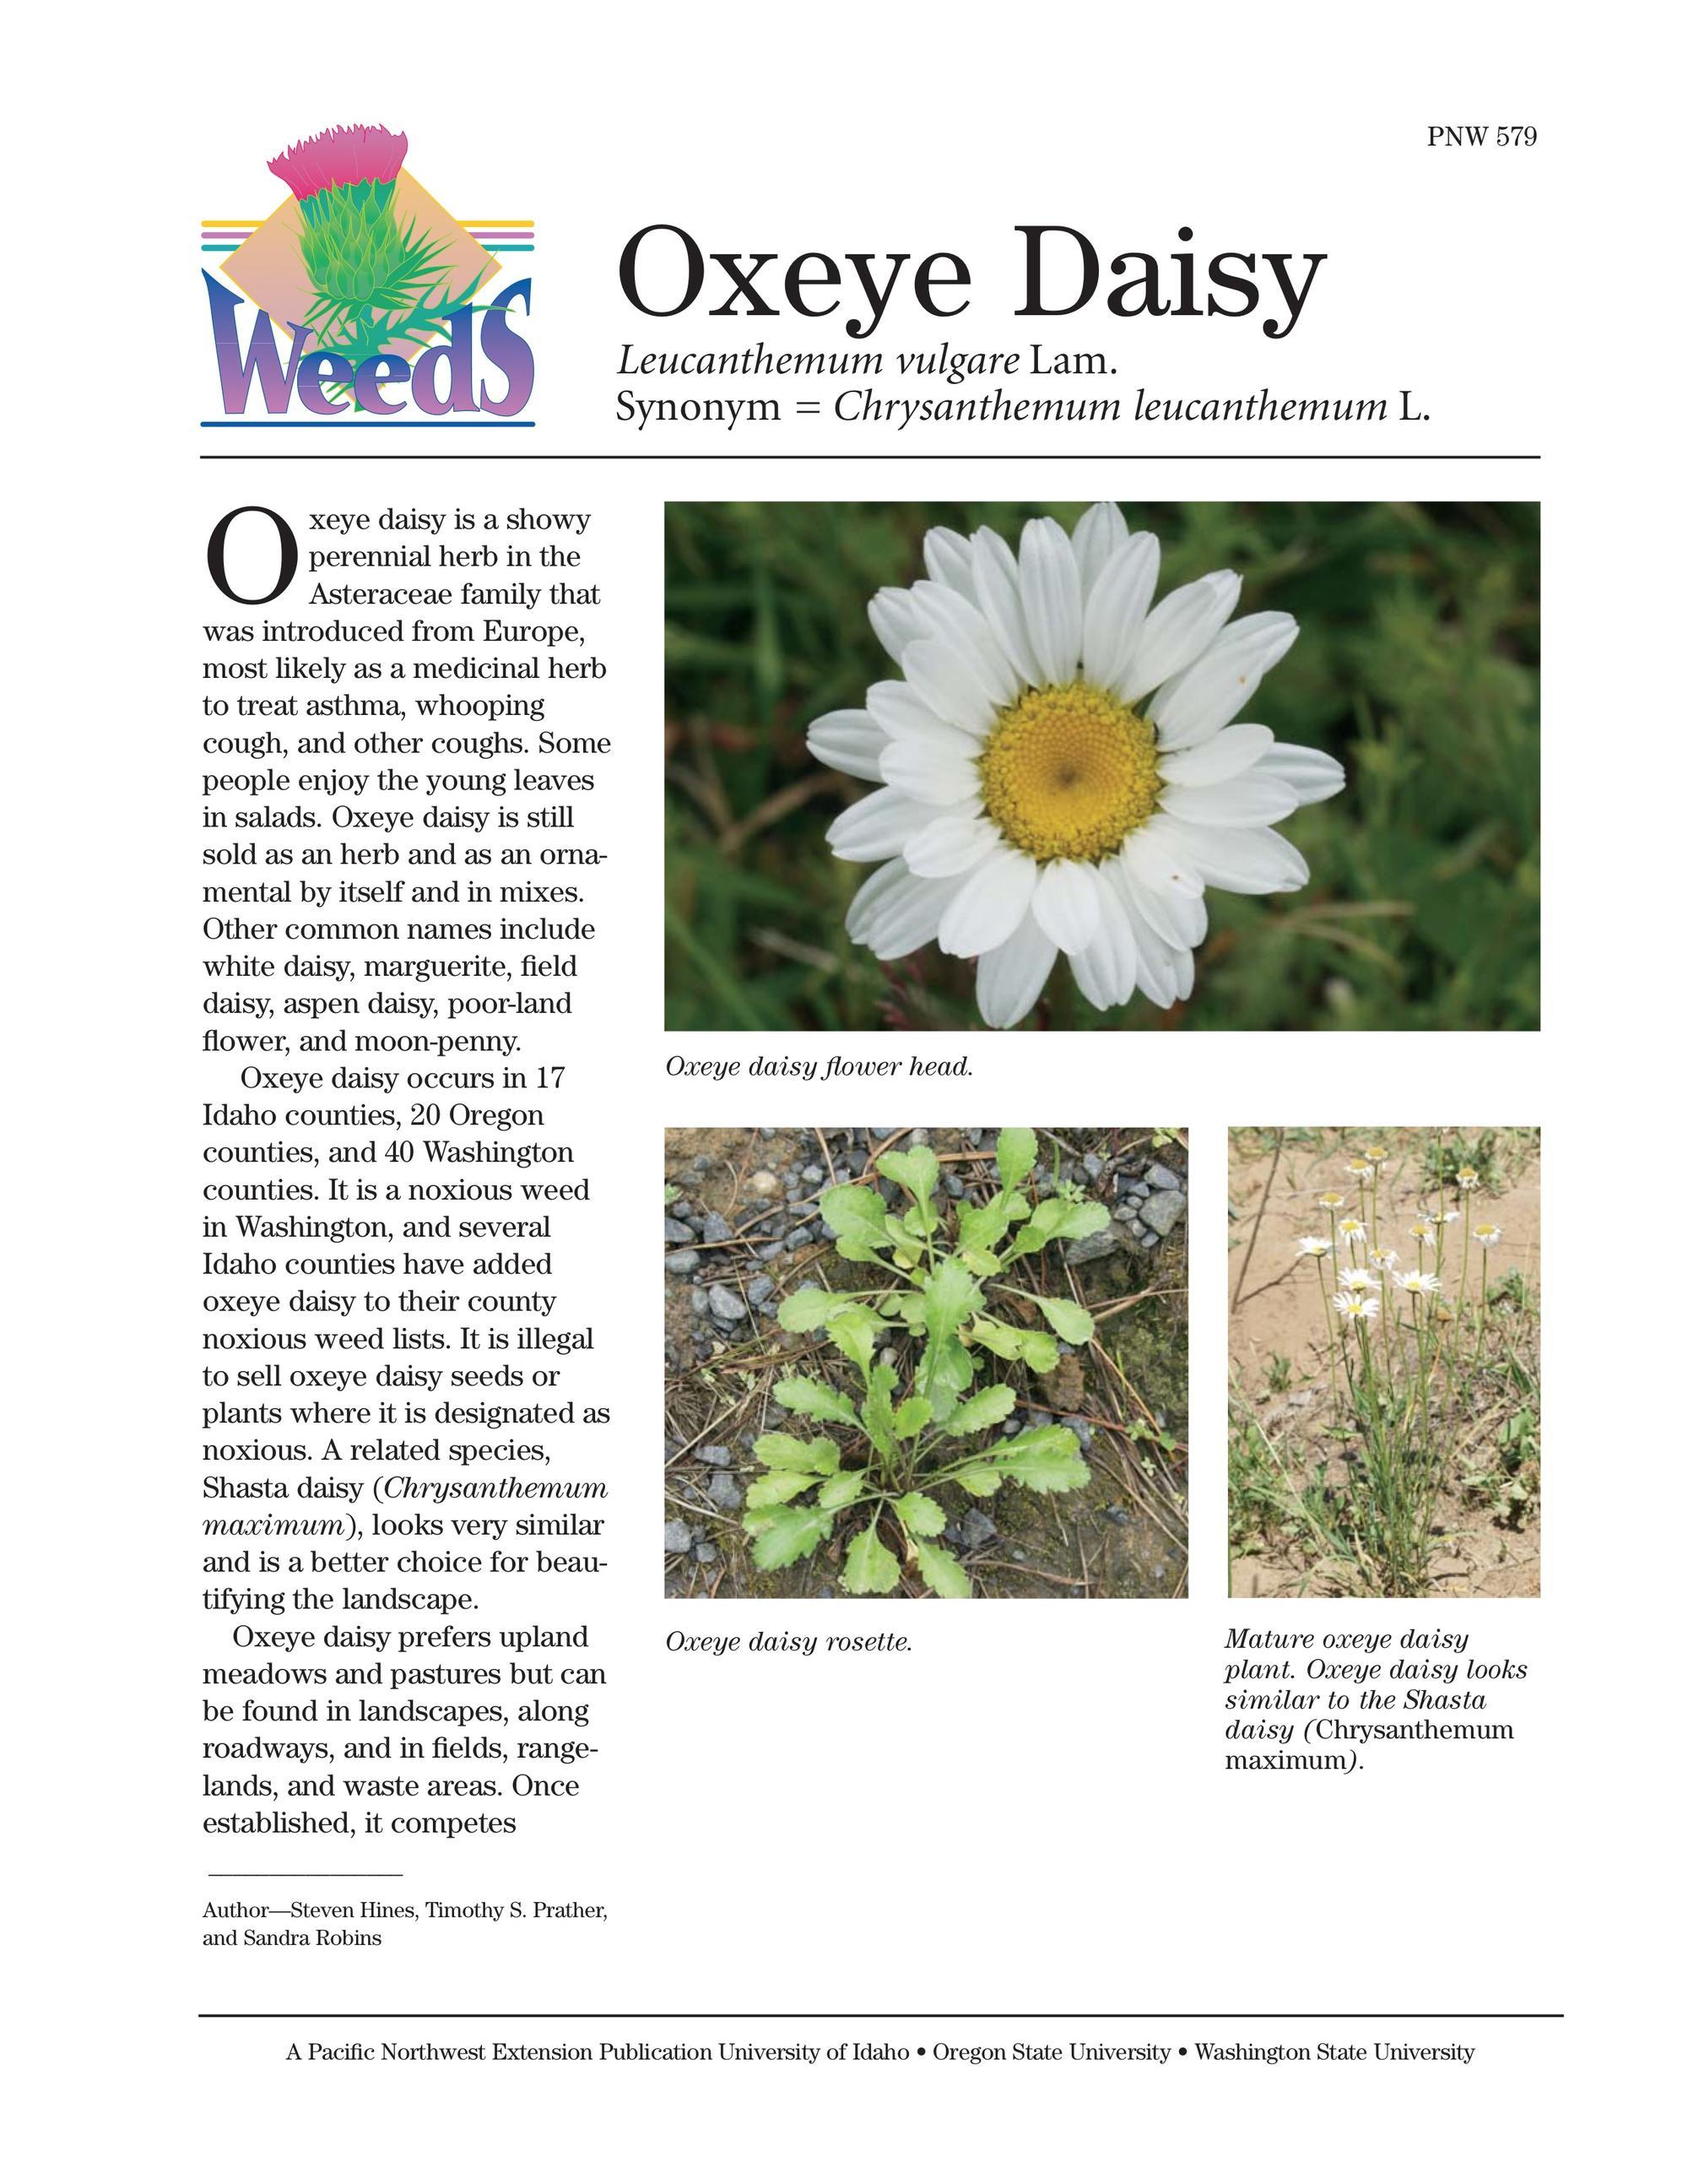 Image of Oxeye Daisy publication